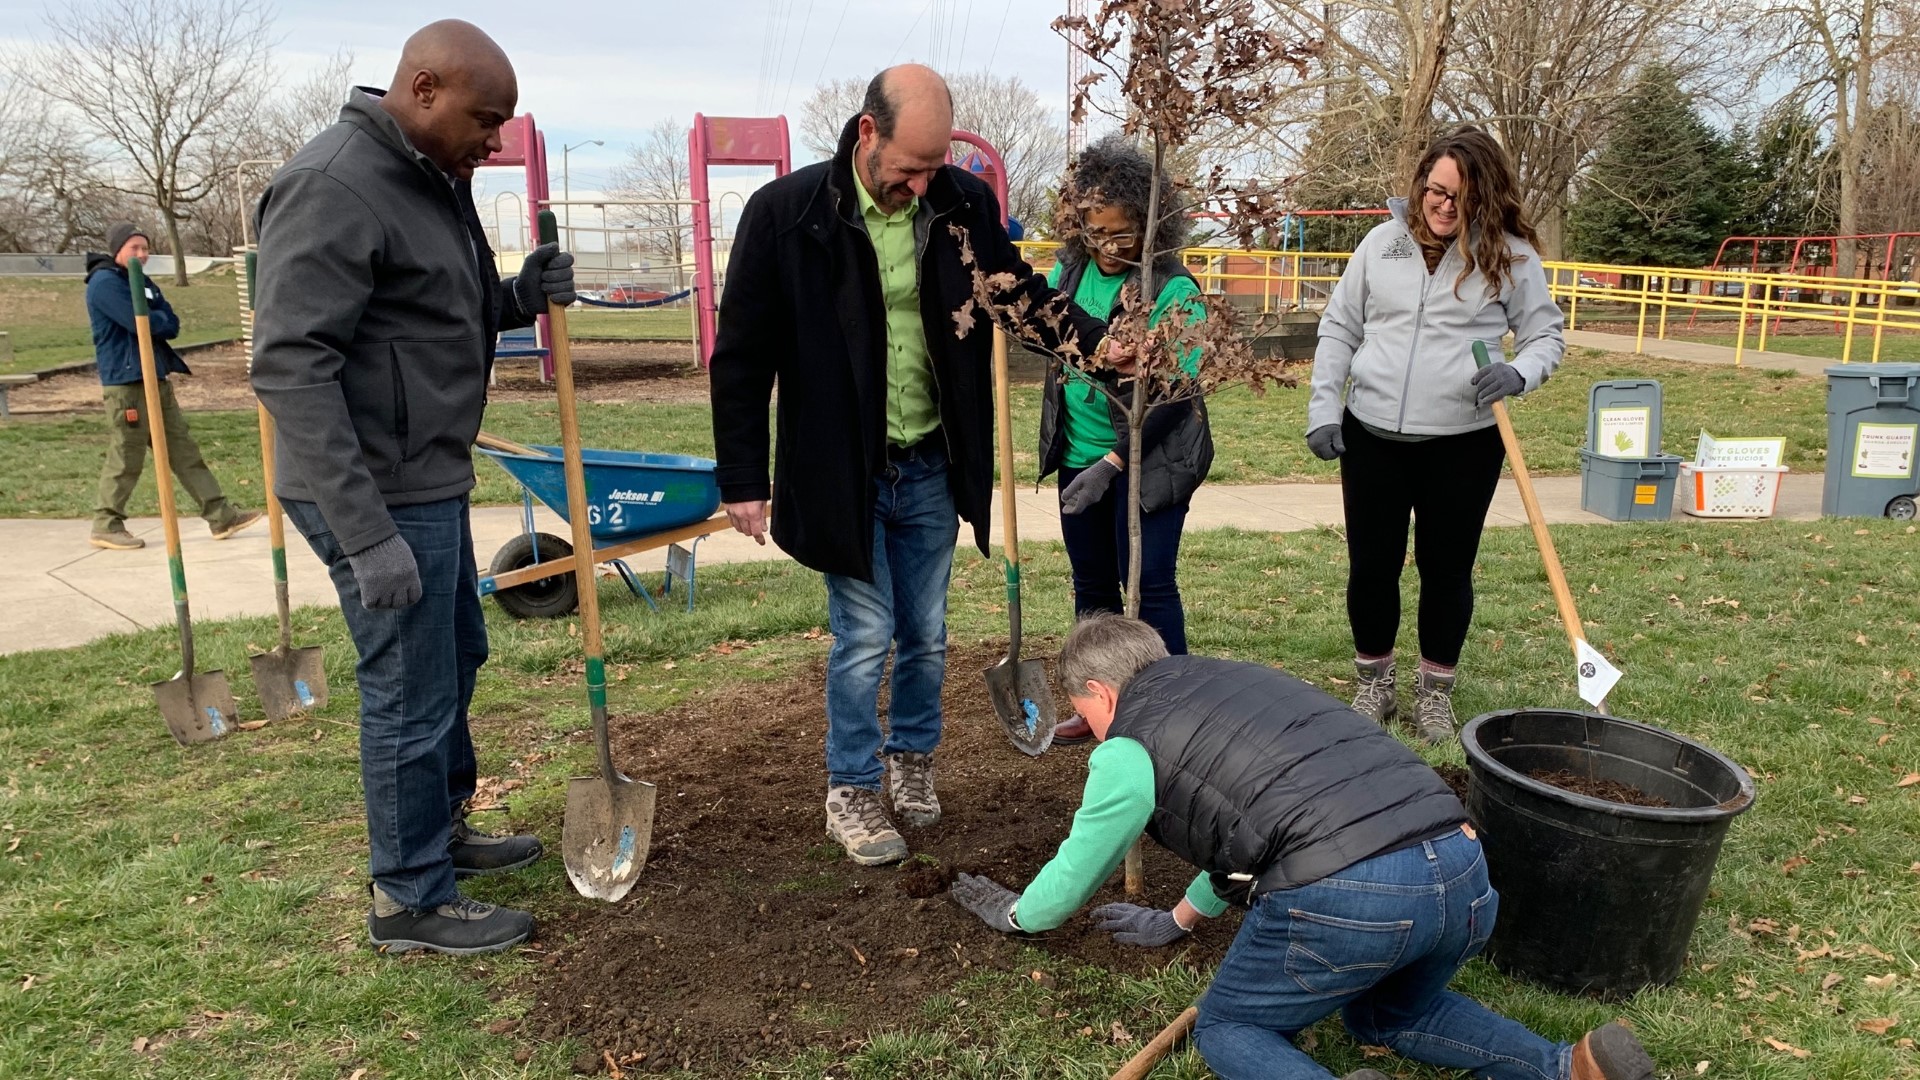 The group started the effort in 2018, with a goal to plant 30,000 trees by 2025.